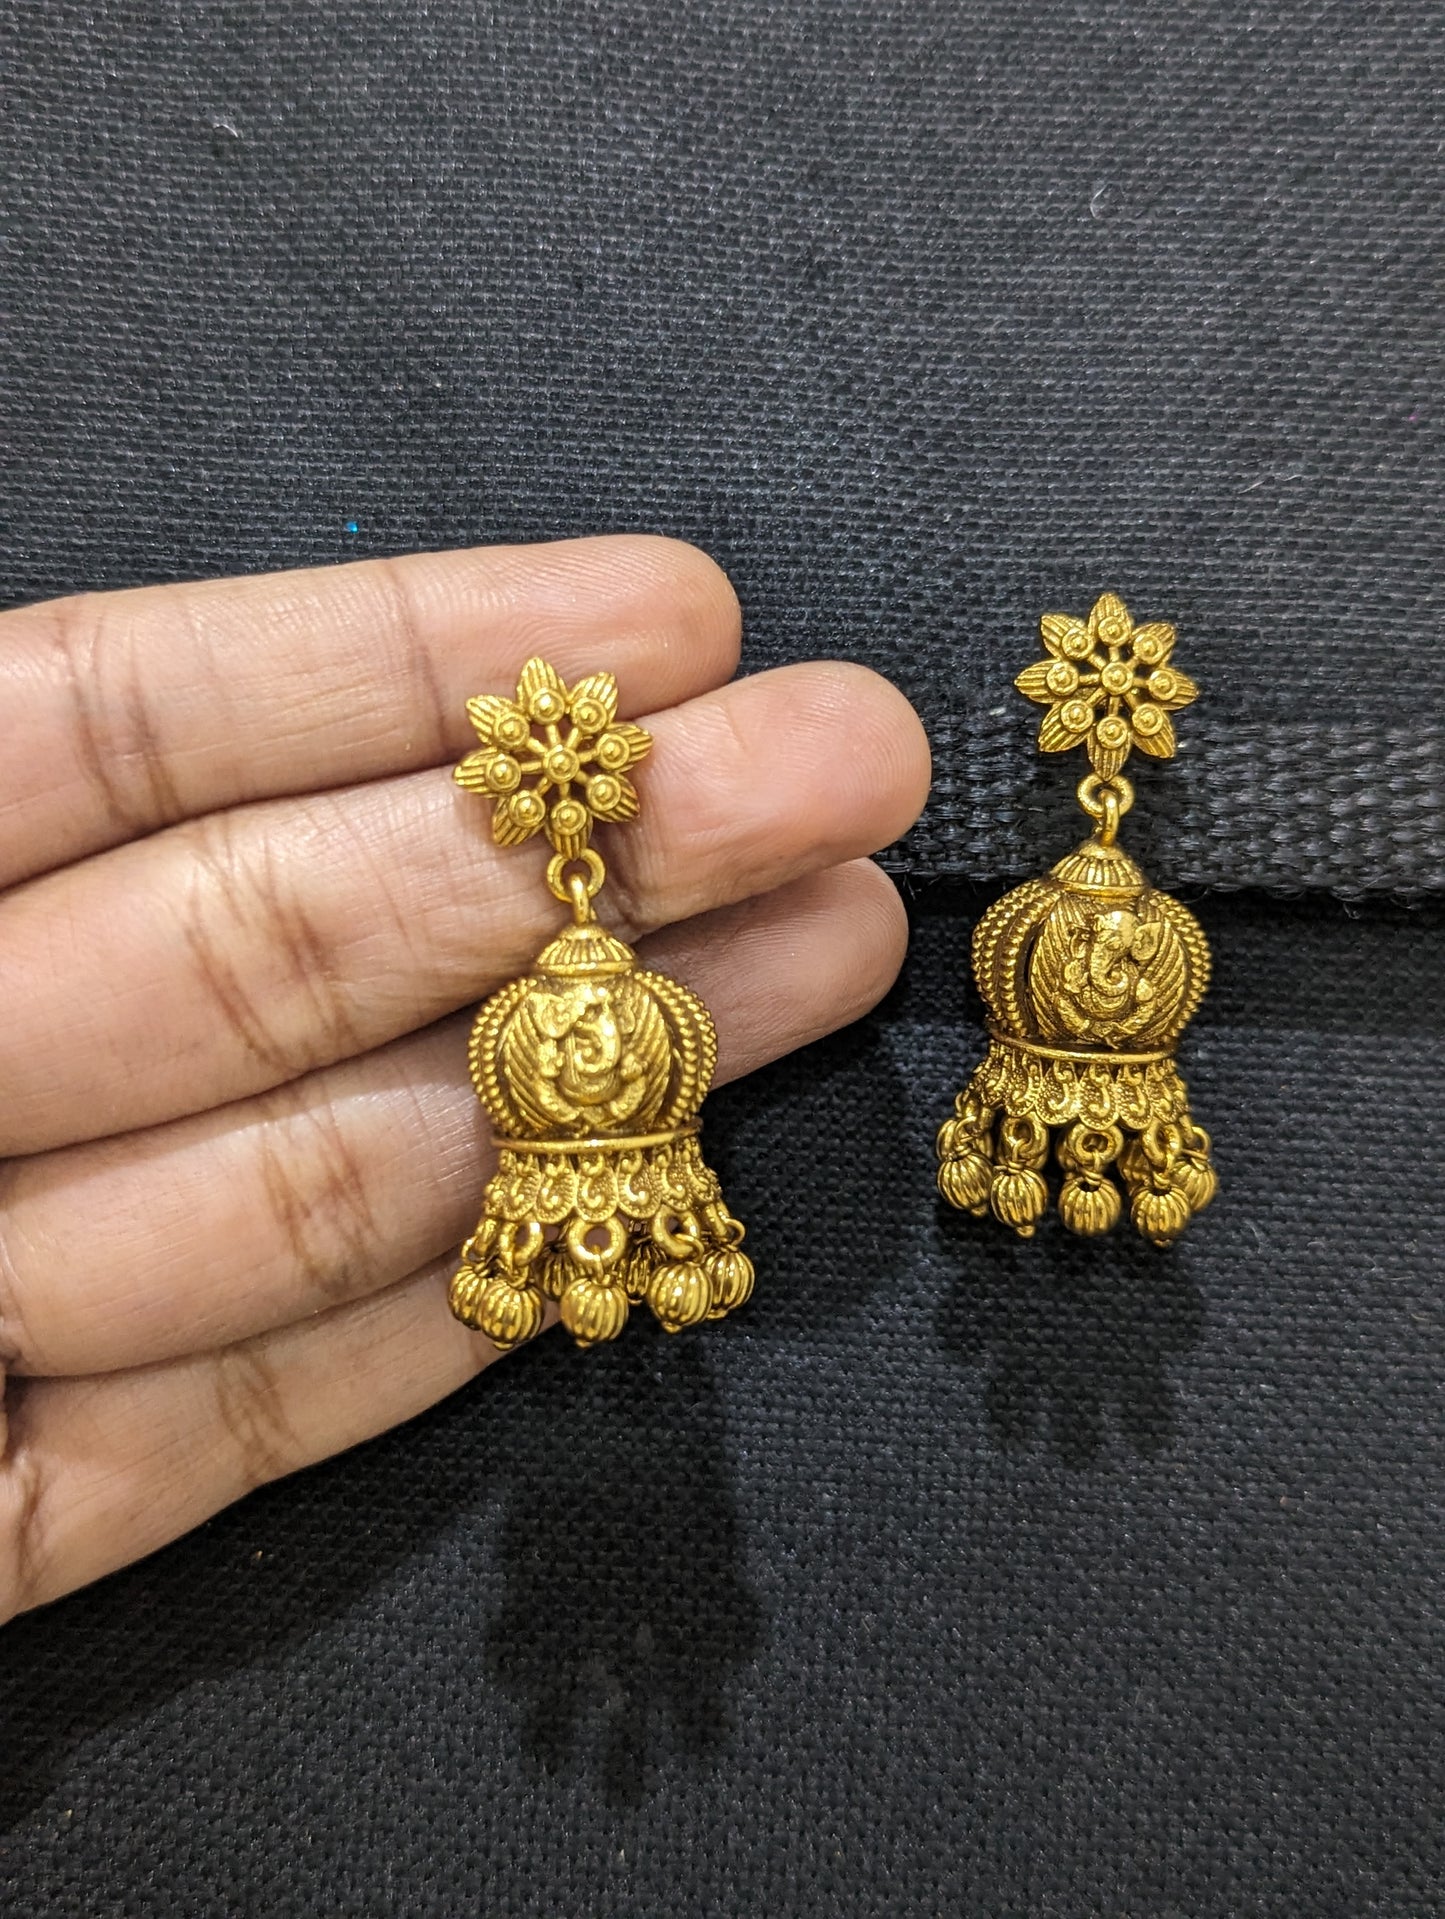 Lord Ganesh Antique gold Jhumka Earrings